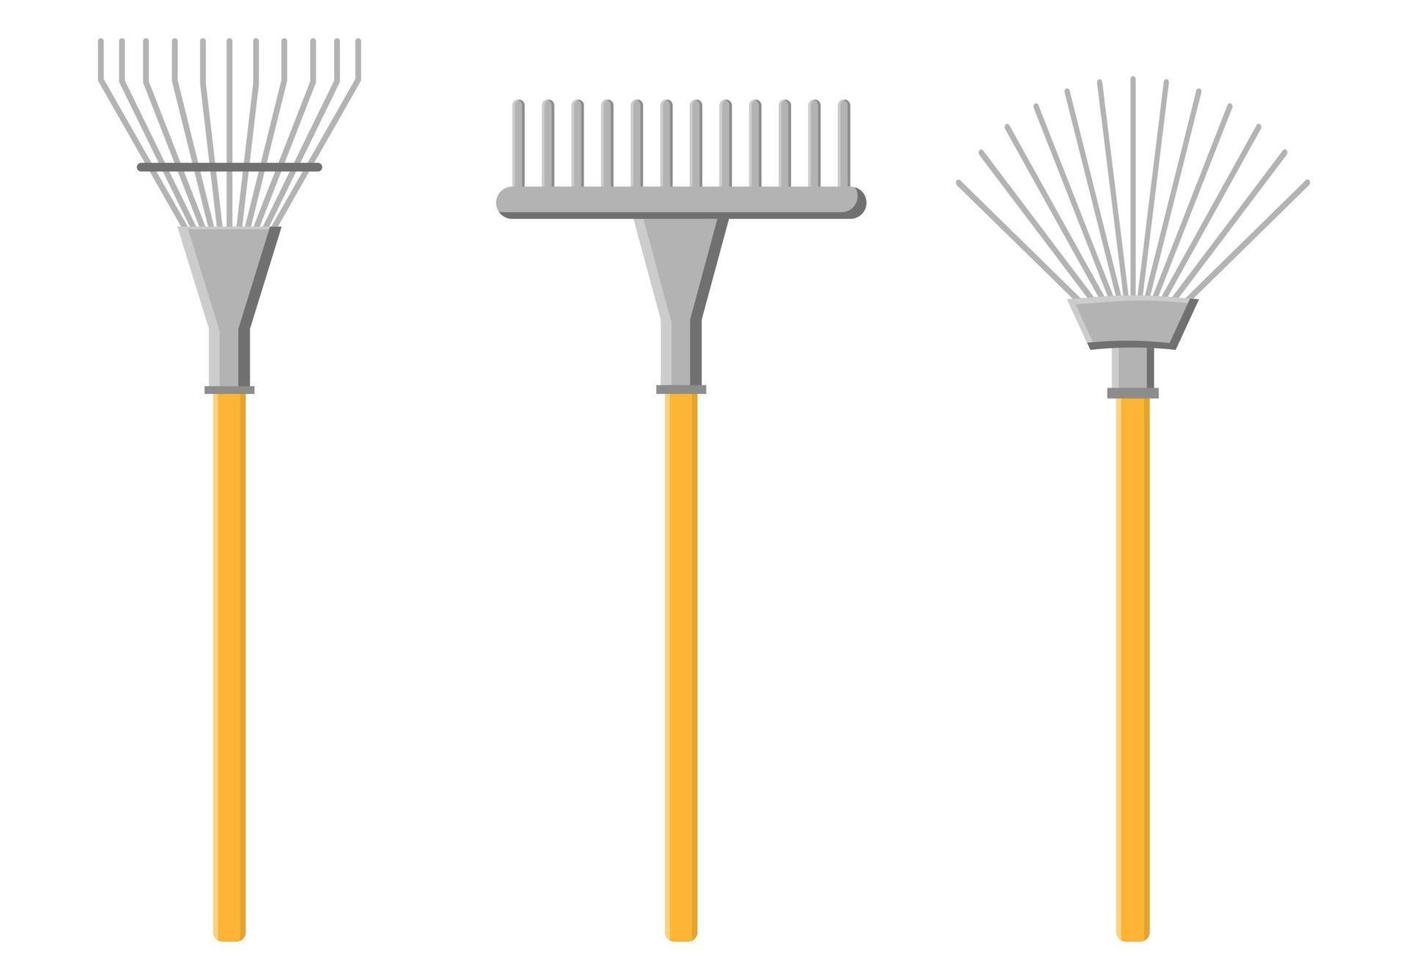 Set of cartoon rake icons isolated on white background. Gardening tools. Vector illustration in cartoon style for your design